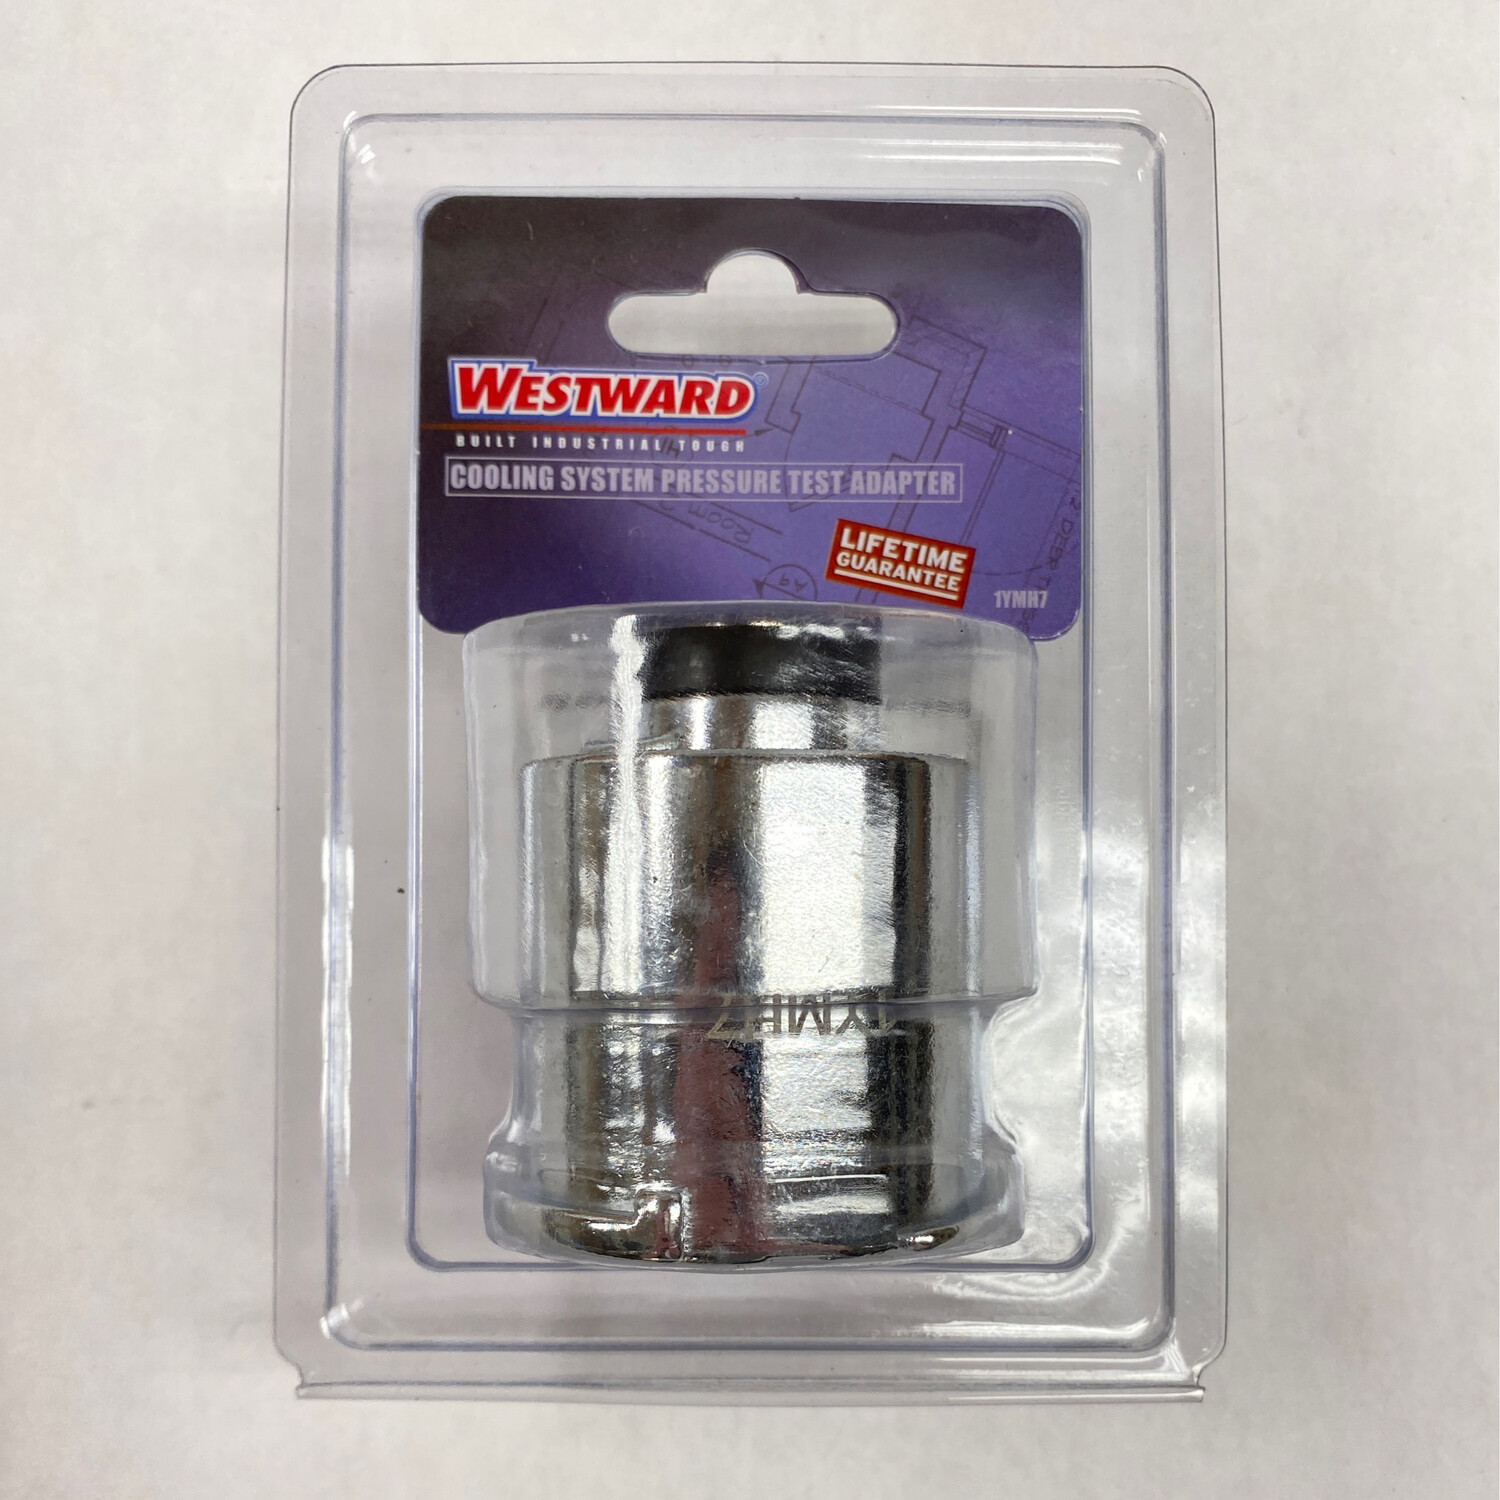 Westward Cooling System Pressure Test Adapter, 1YMH7